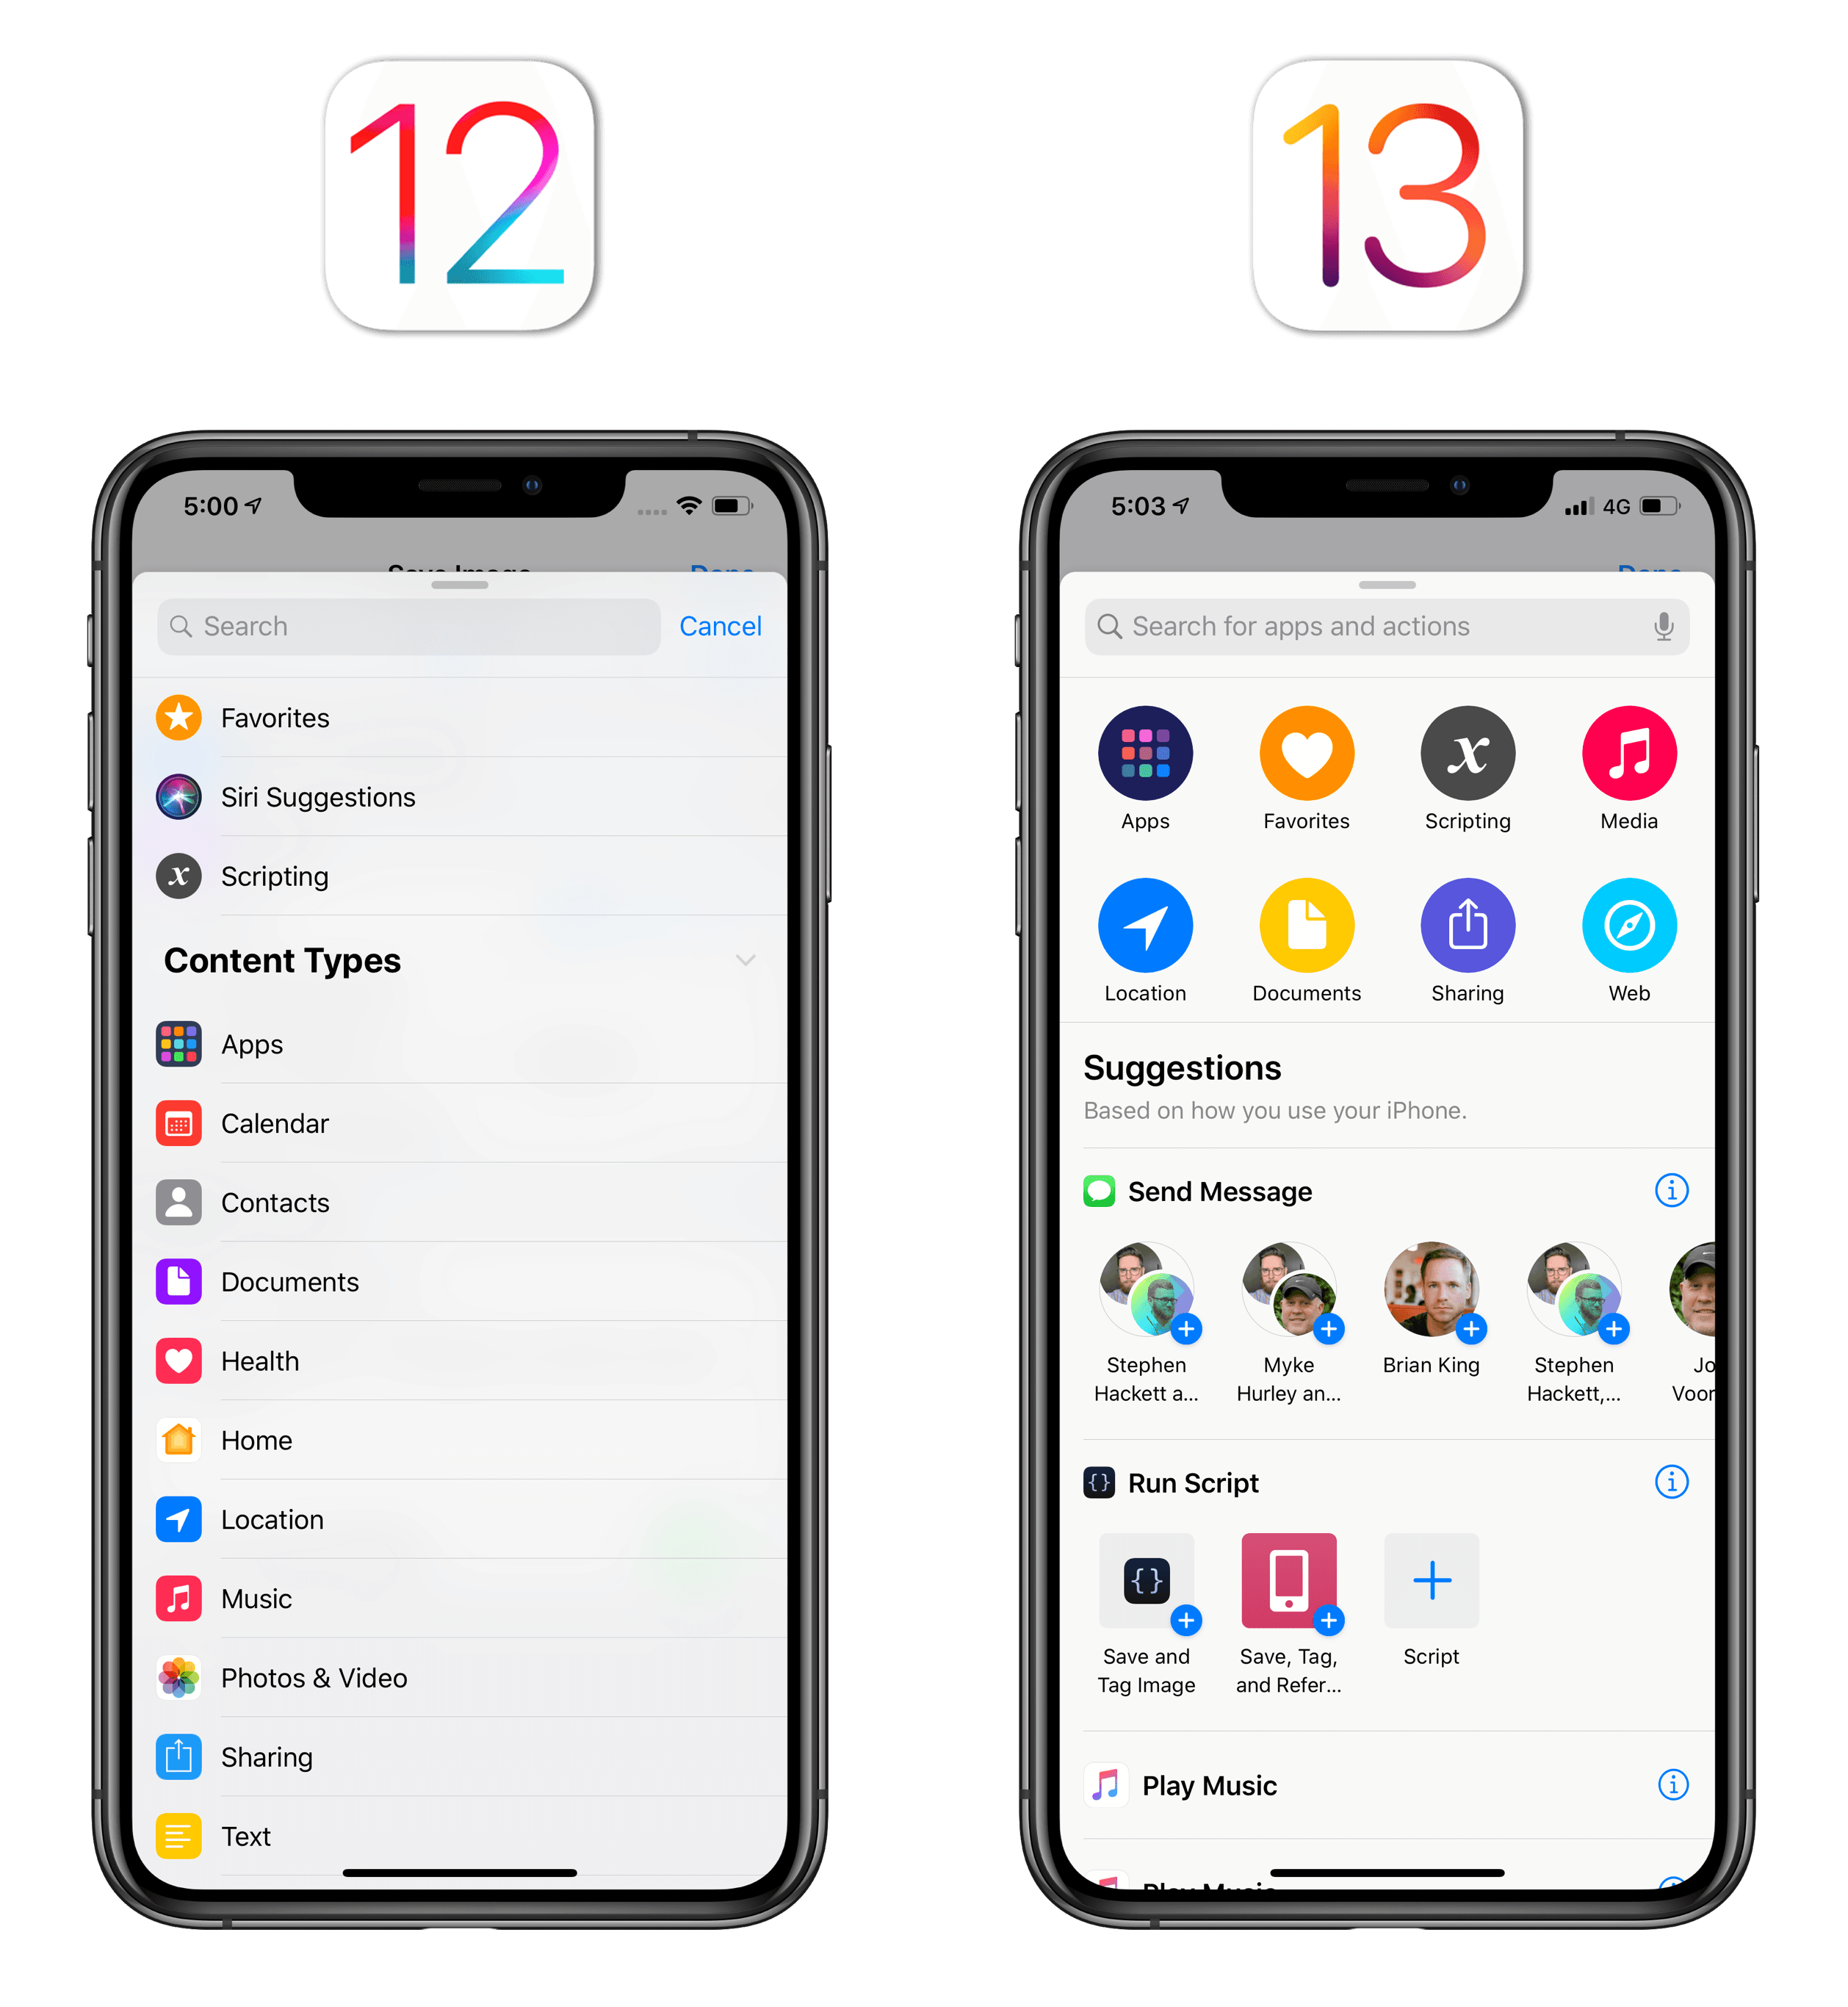 In iOS 13, Shortcuts surfaces suggestions for app actions with specific parameters already filled in.